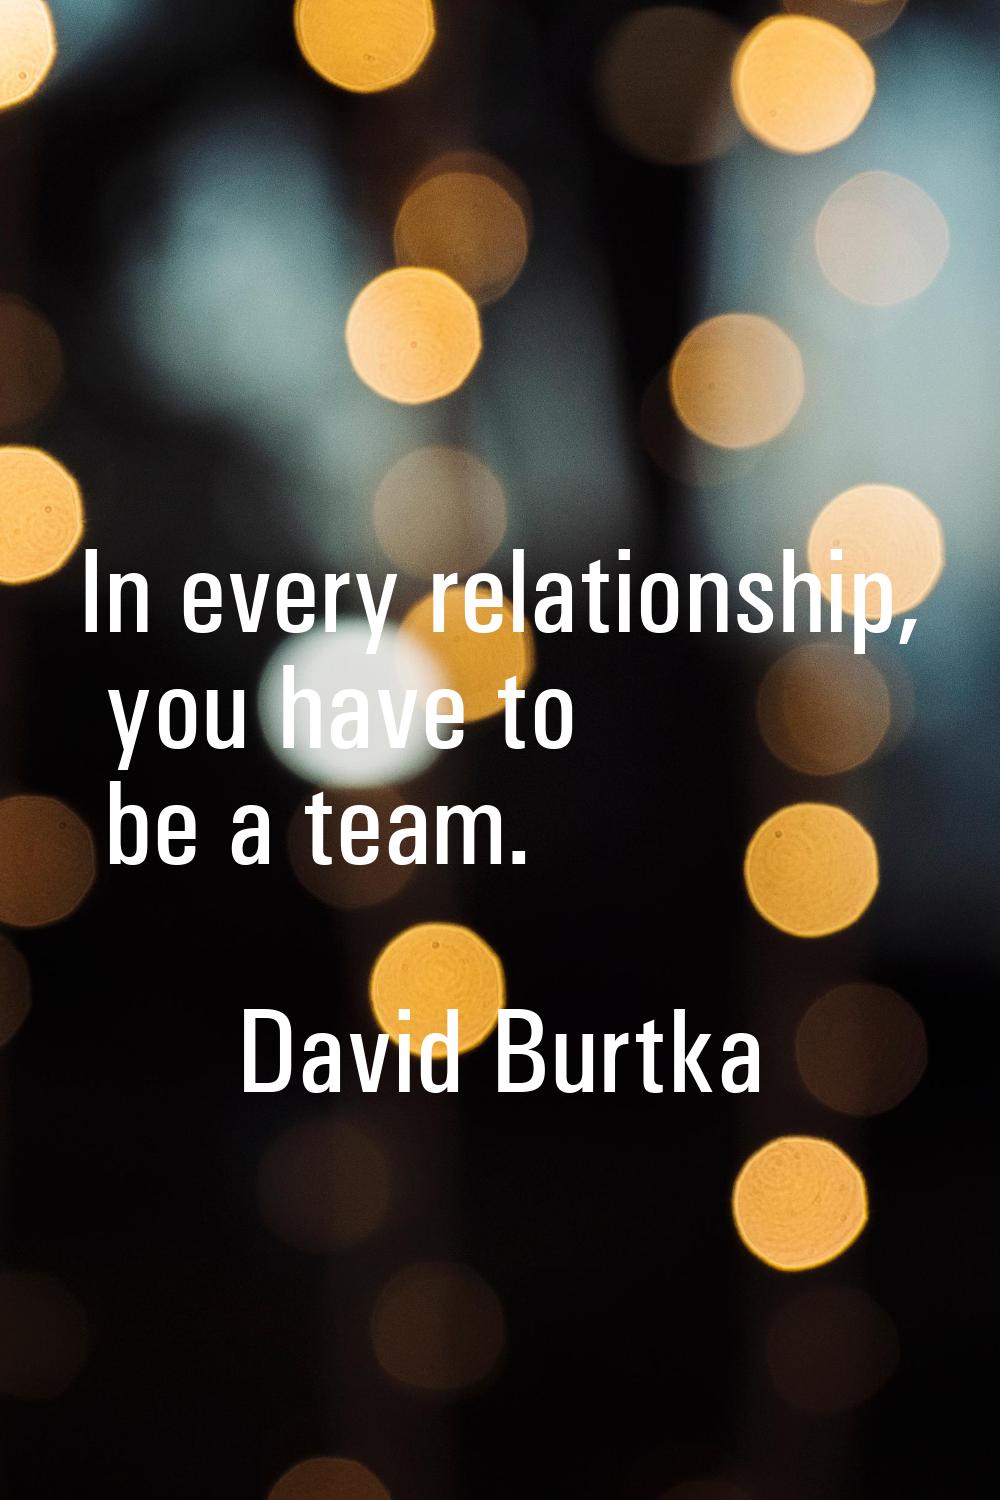 In every relationship, you have to be a team.